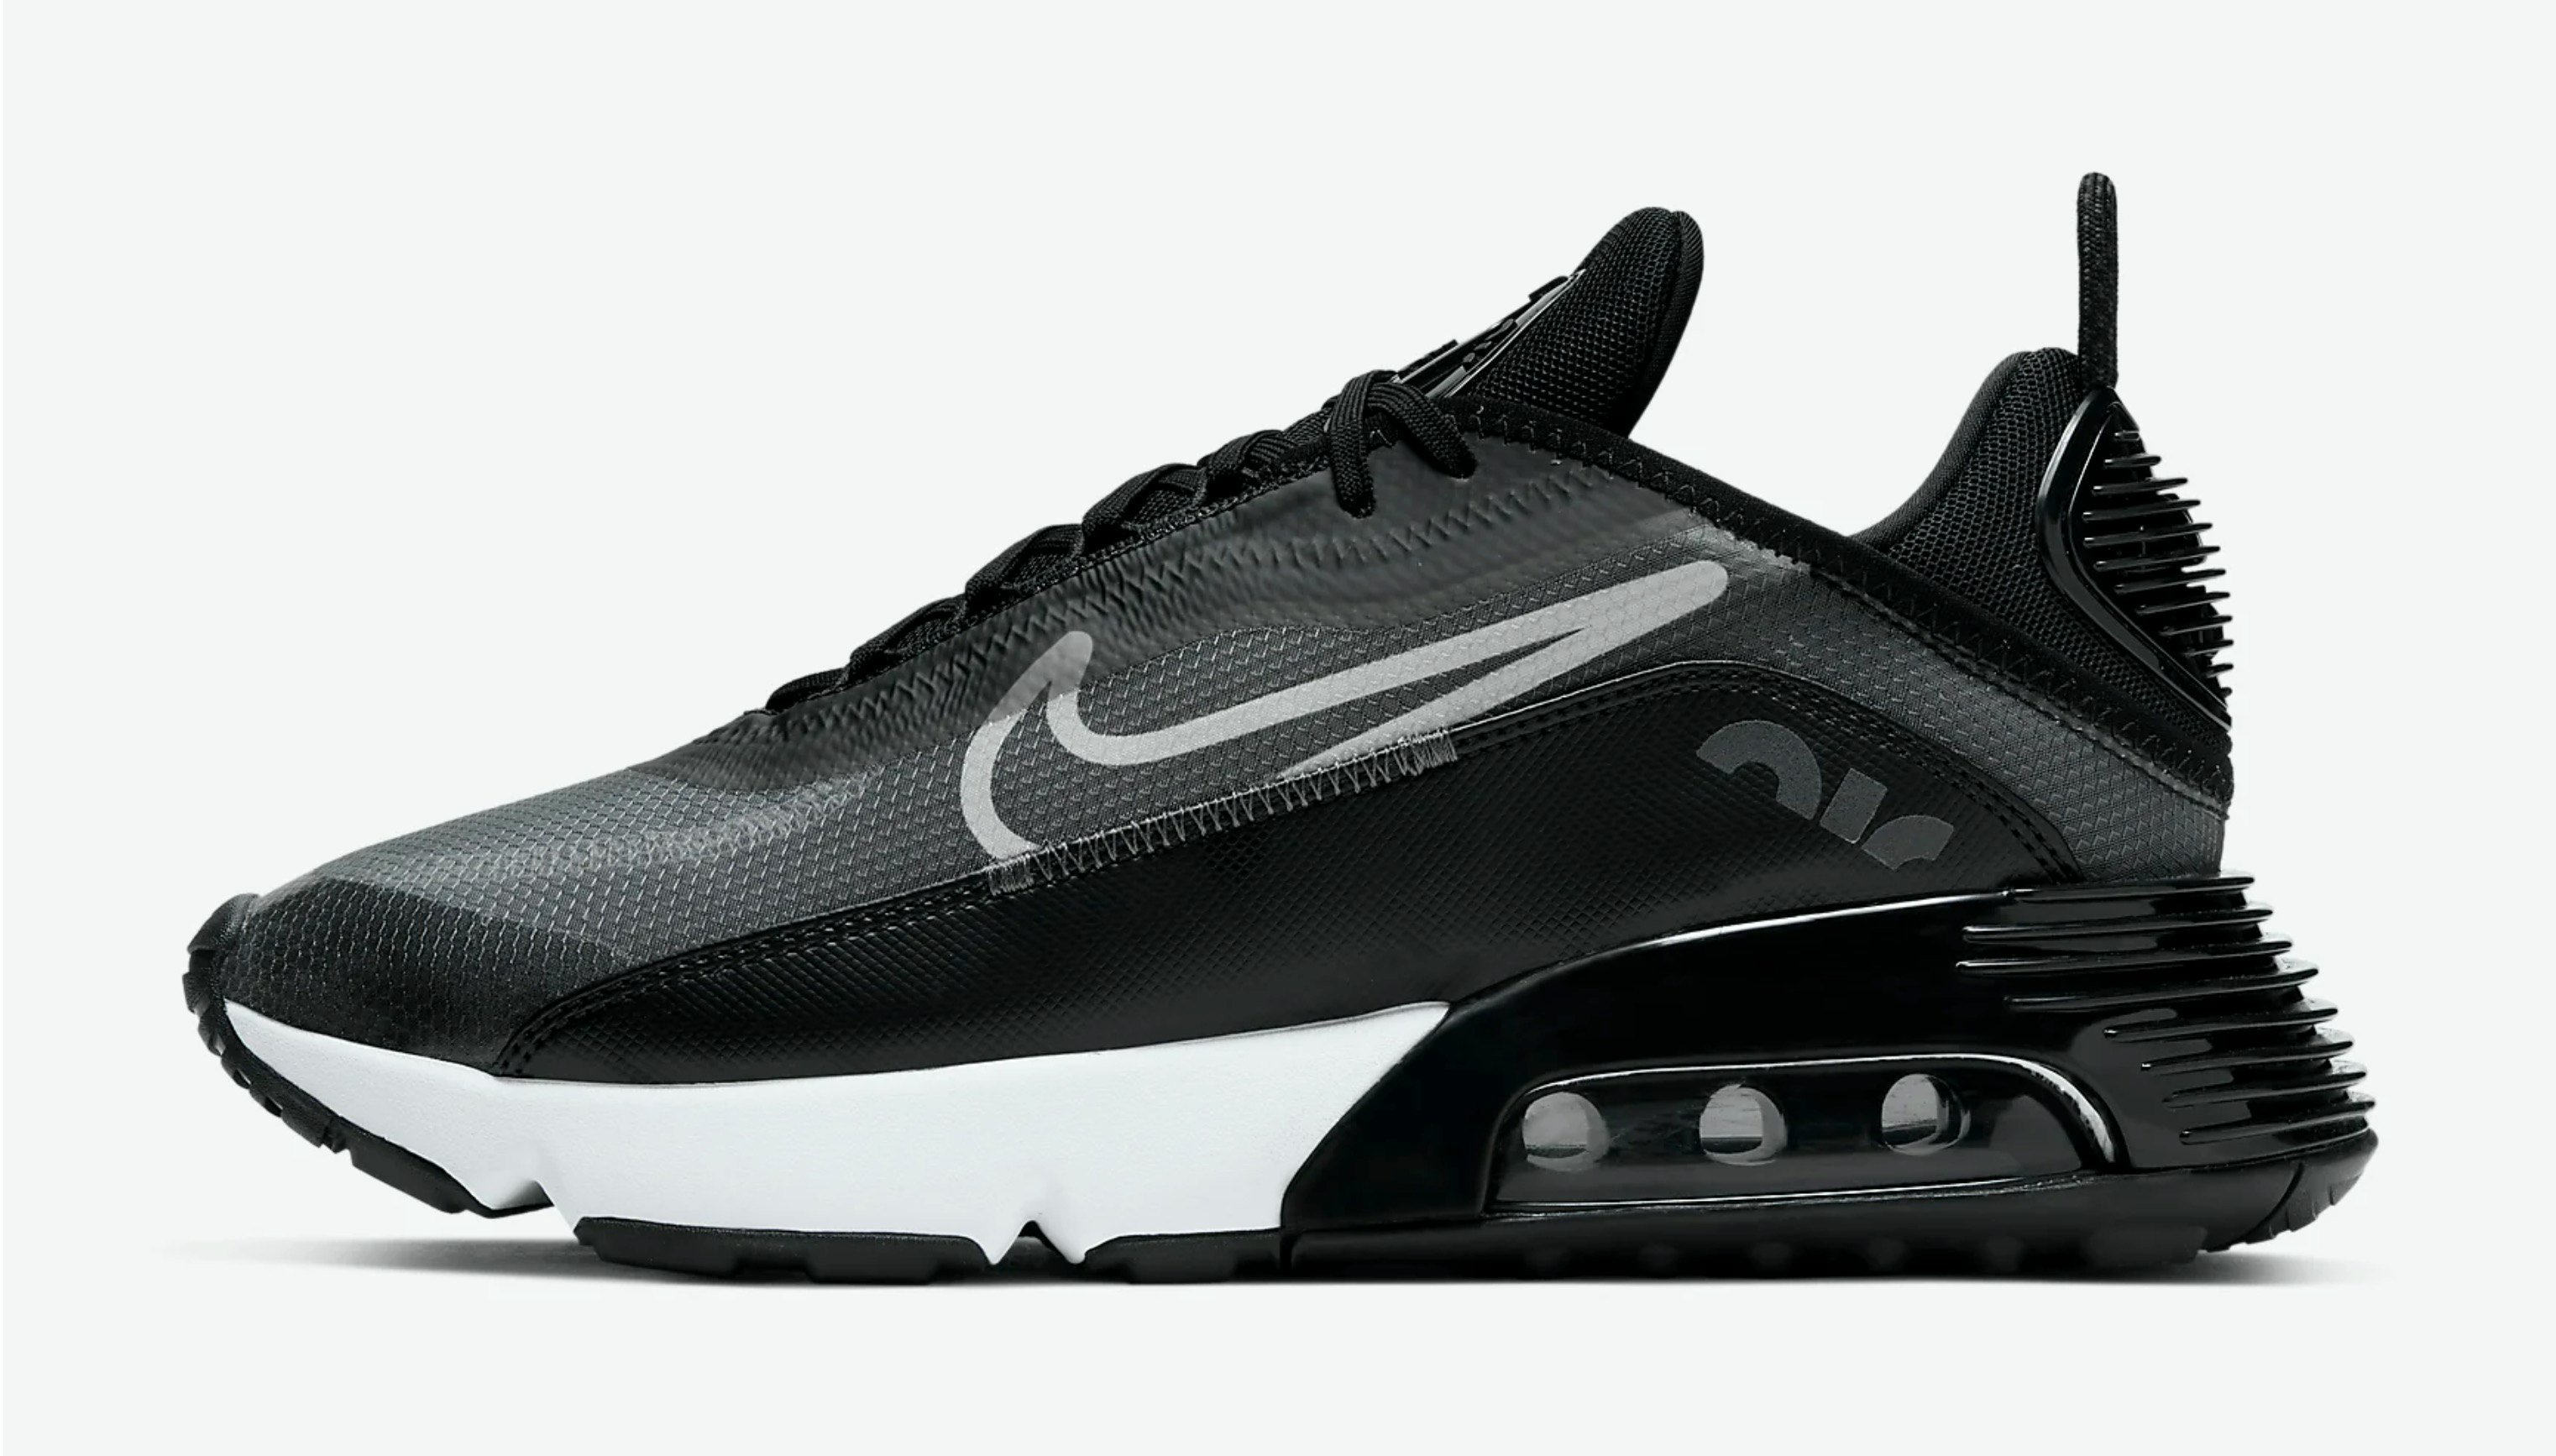 One of Nike's most cushiony Air Max sneakers are 44% off right now